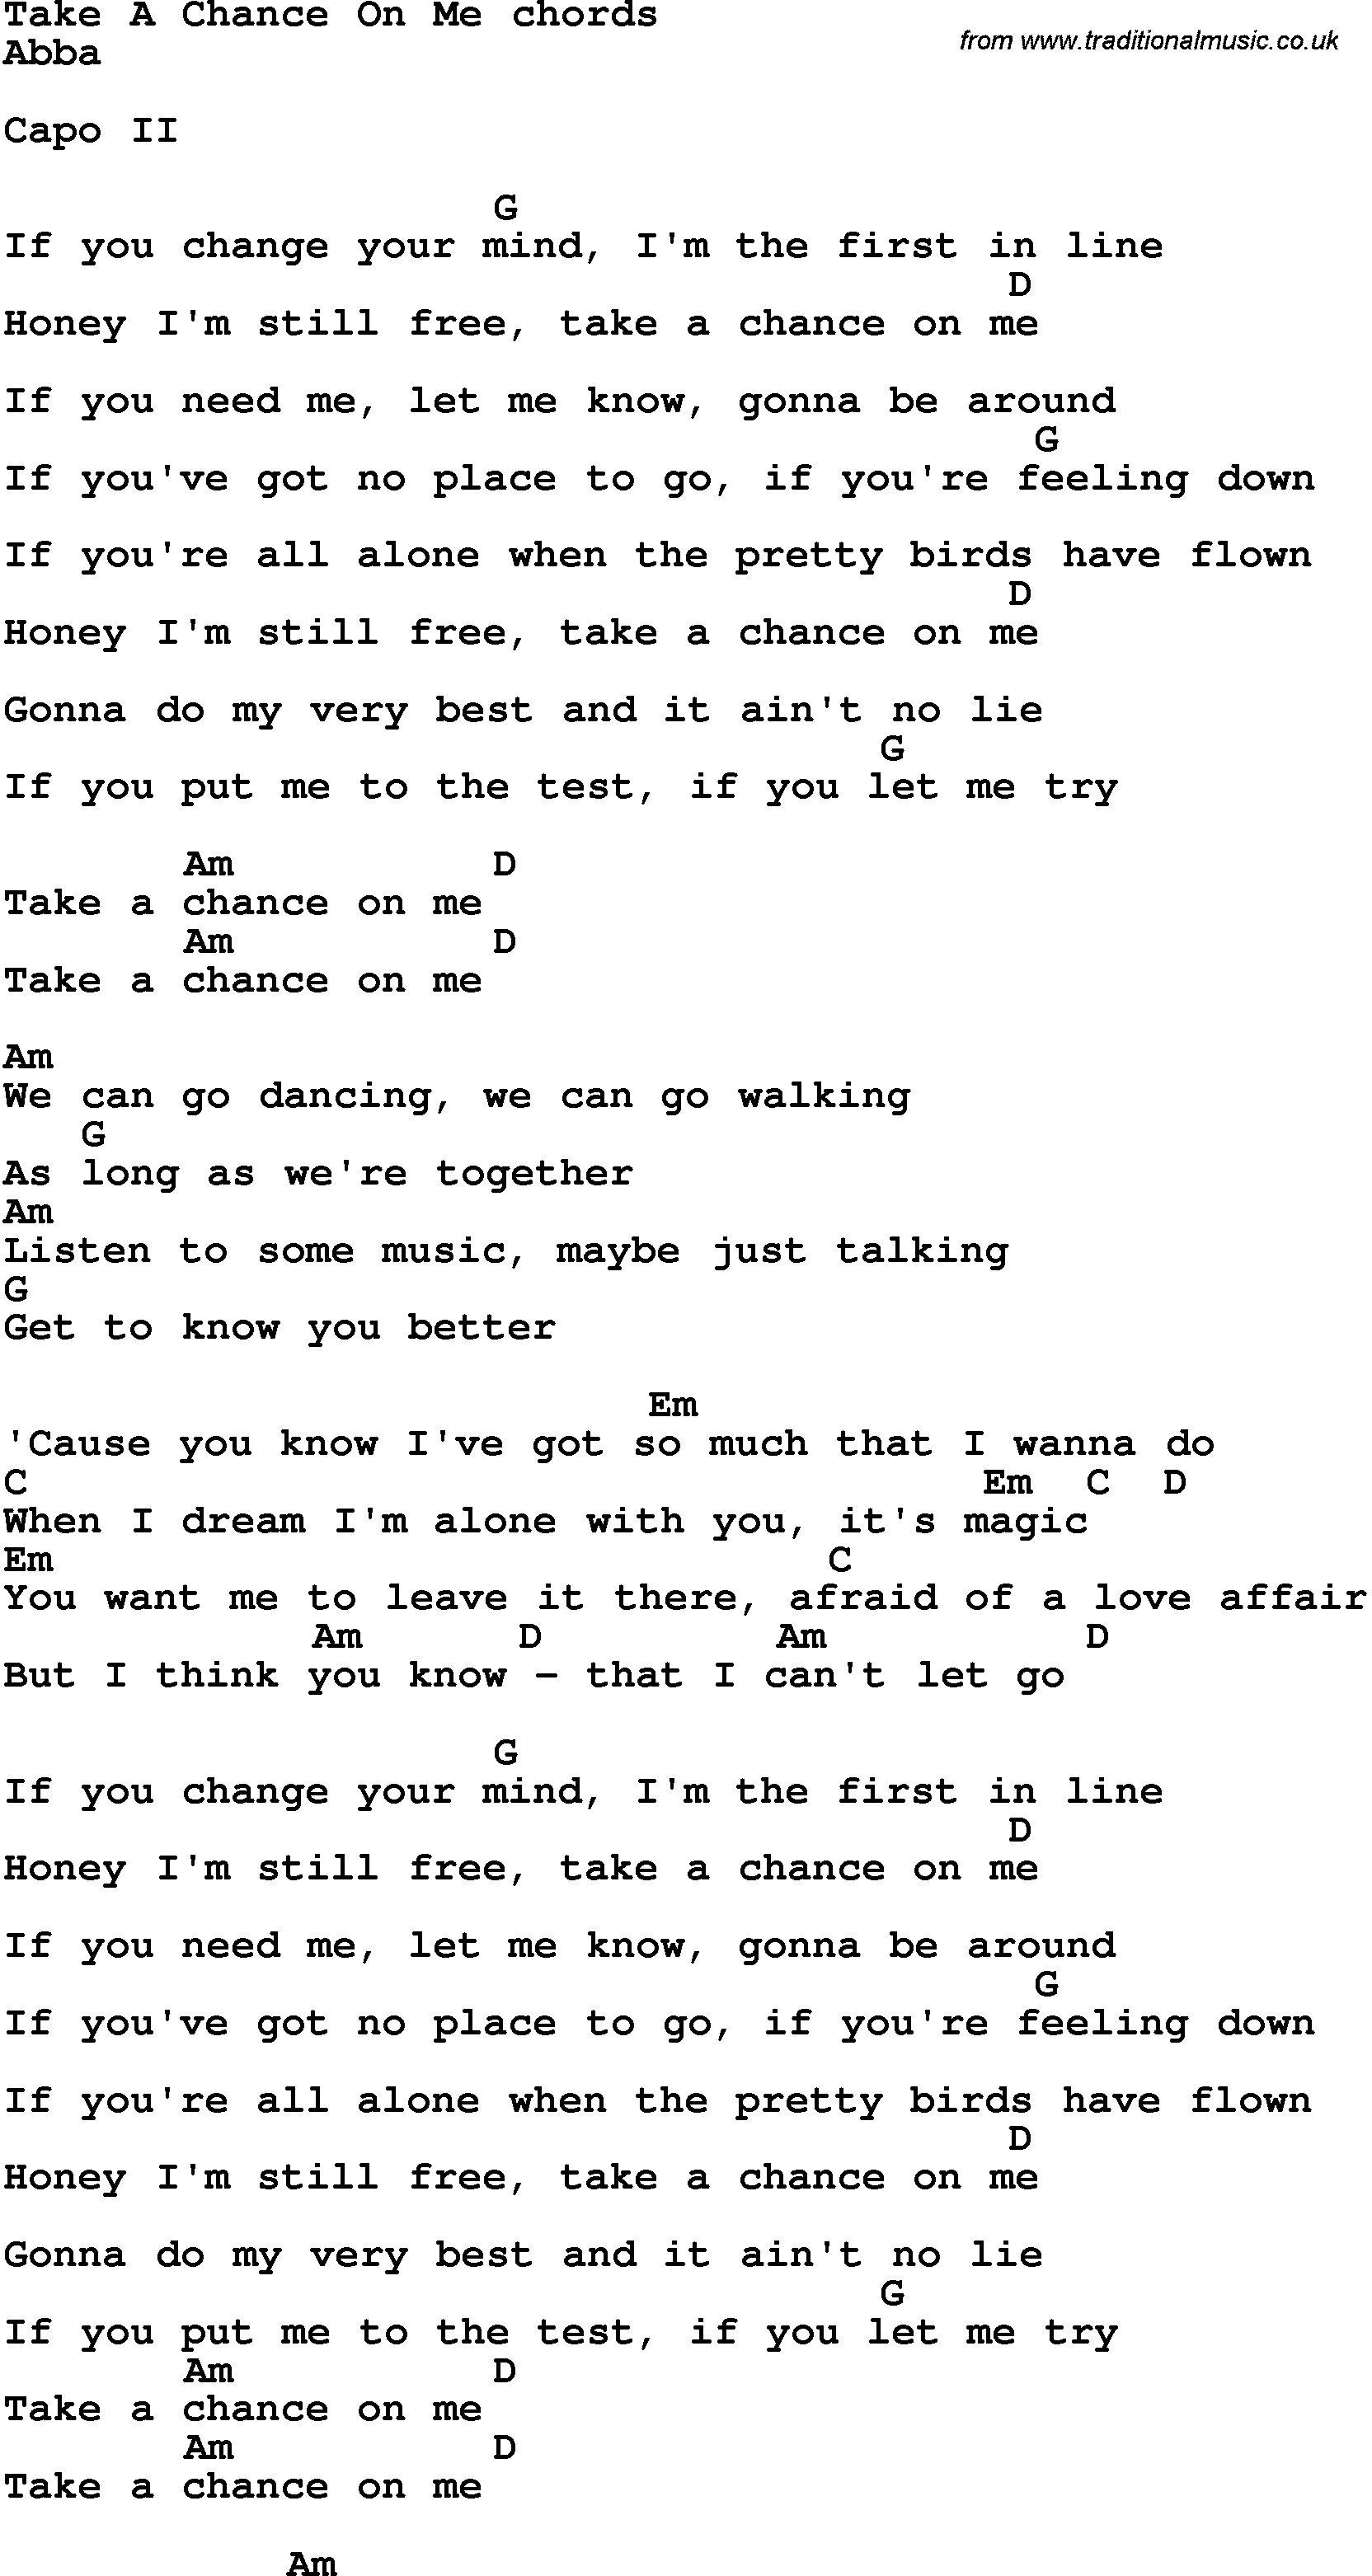 Song Lyrics with guitar chords for Take A Chance On Me - Abba